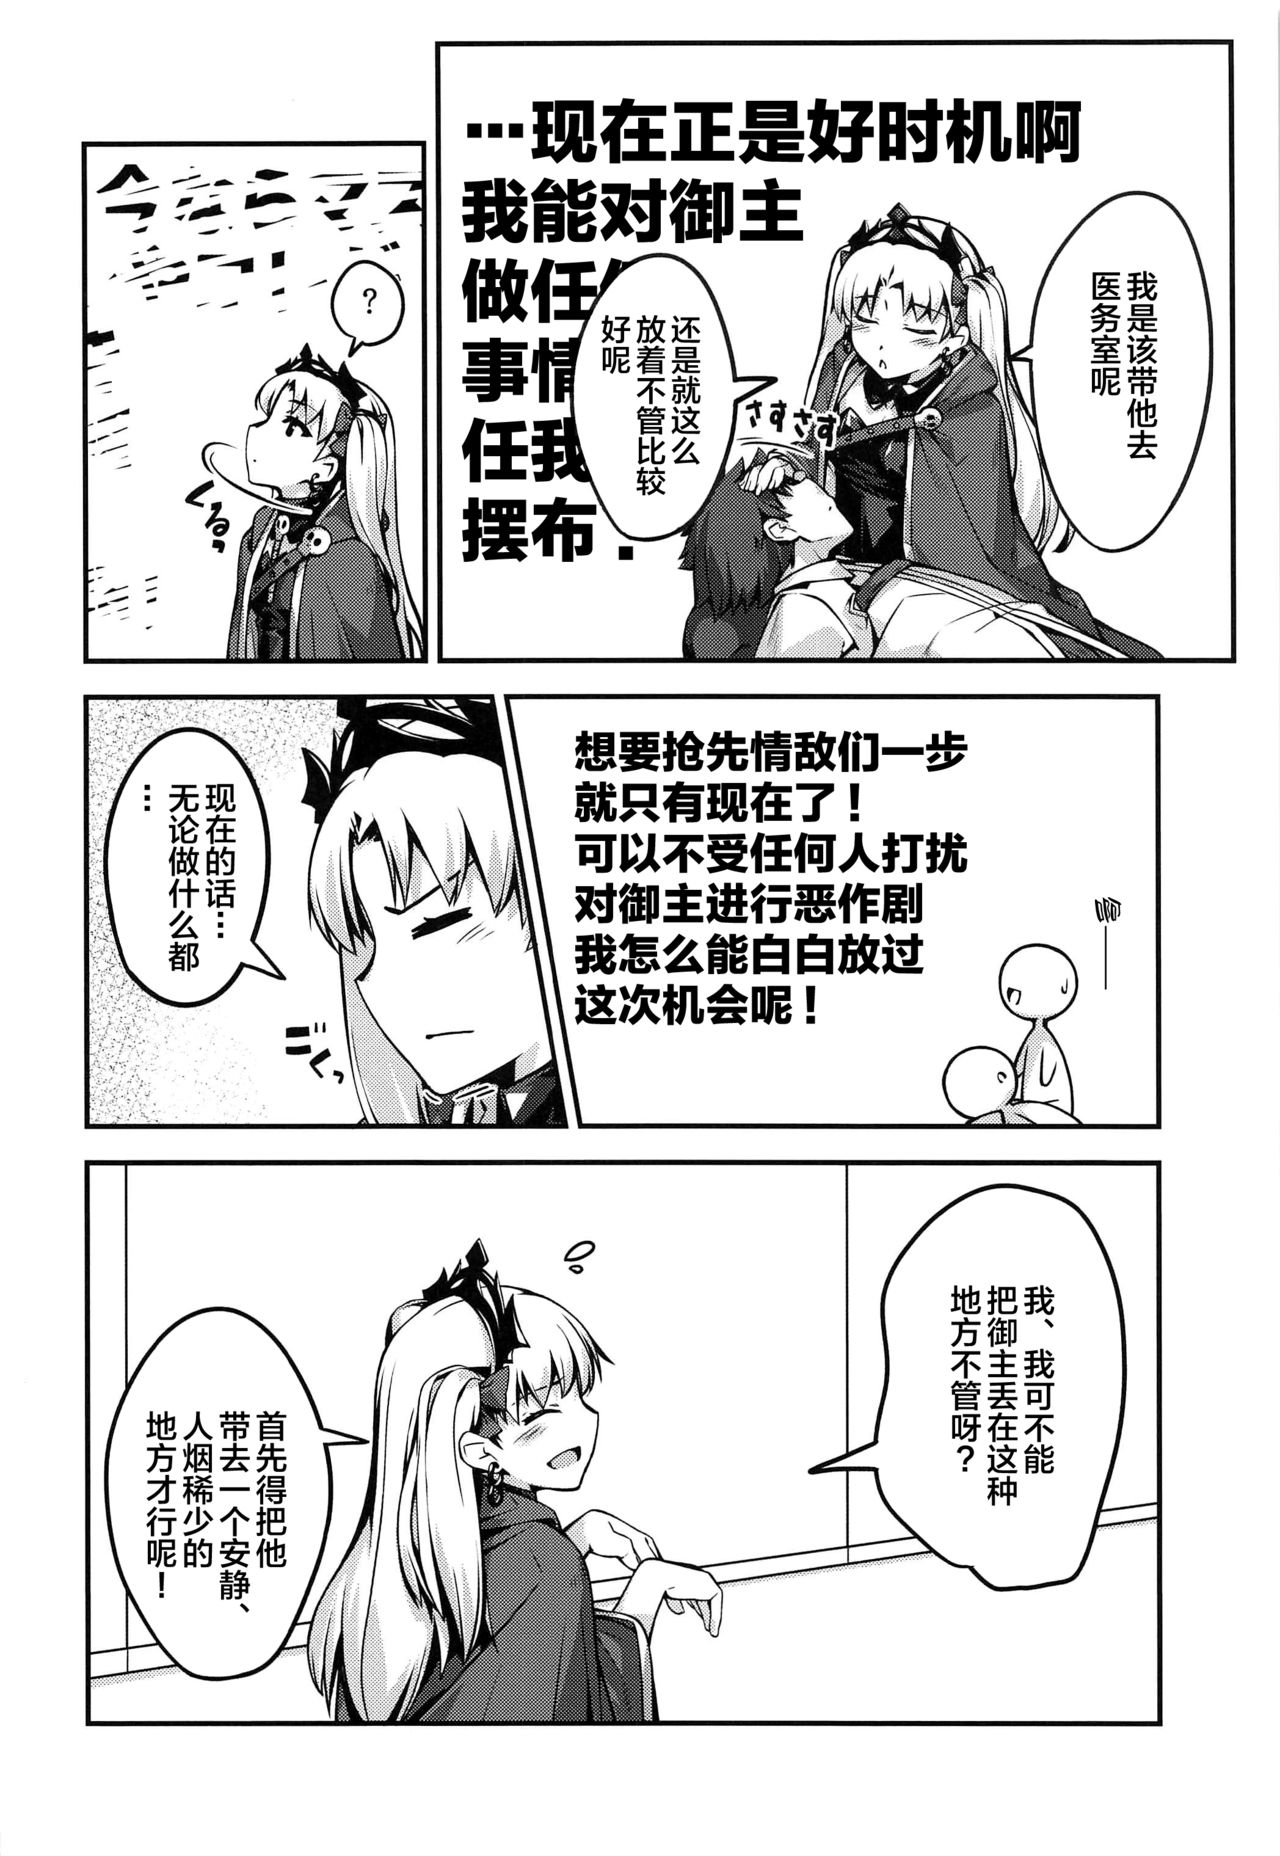 (C97) [Kansyouyou Marmotte (Mr.Lostman)] Hiroigui. (Fate/Grand Order) [Chinese] [黎欧×新桥月白日语社] page 5 full